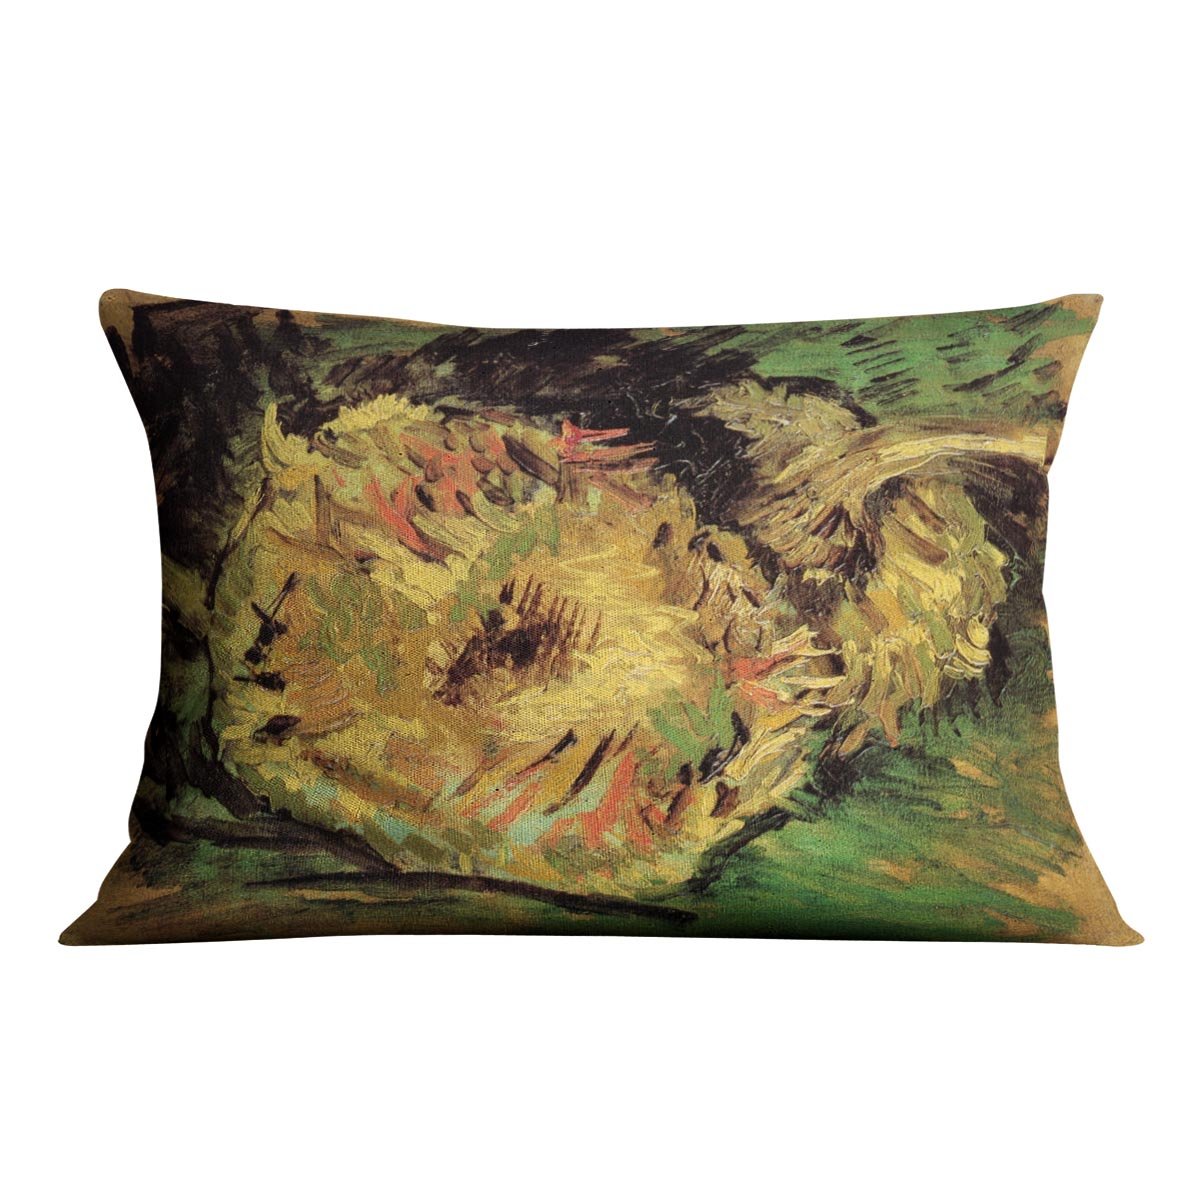 Two Cut Sunflowers by Van Gogh Throw Pillow